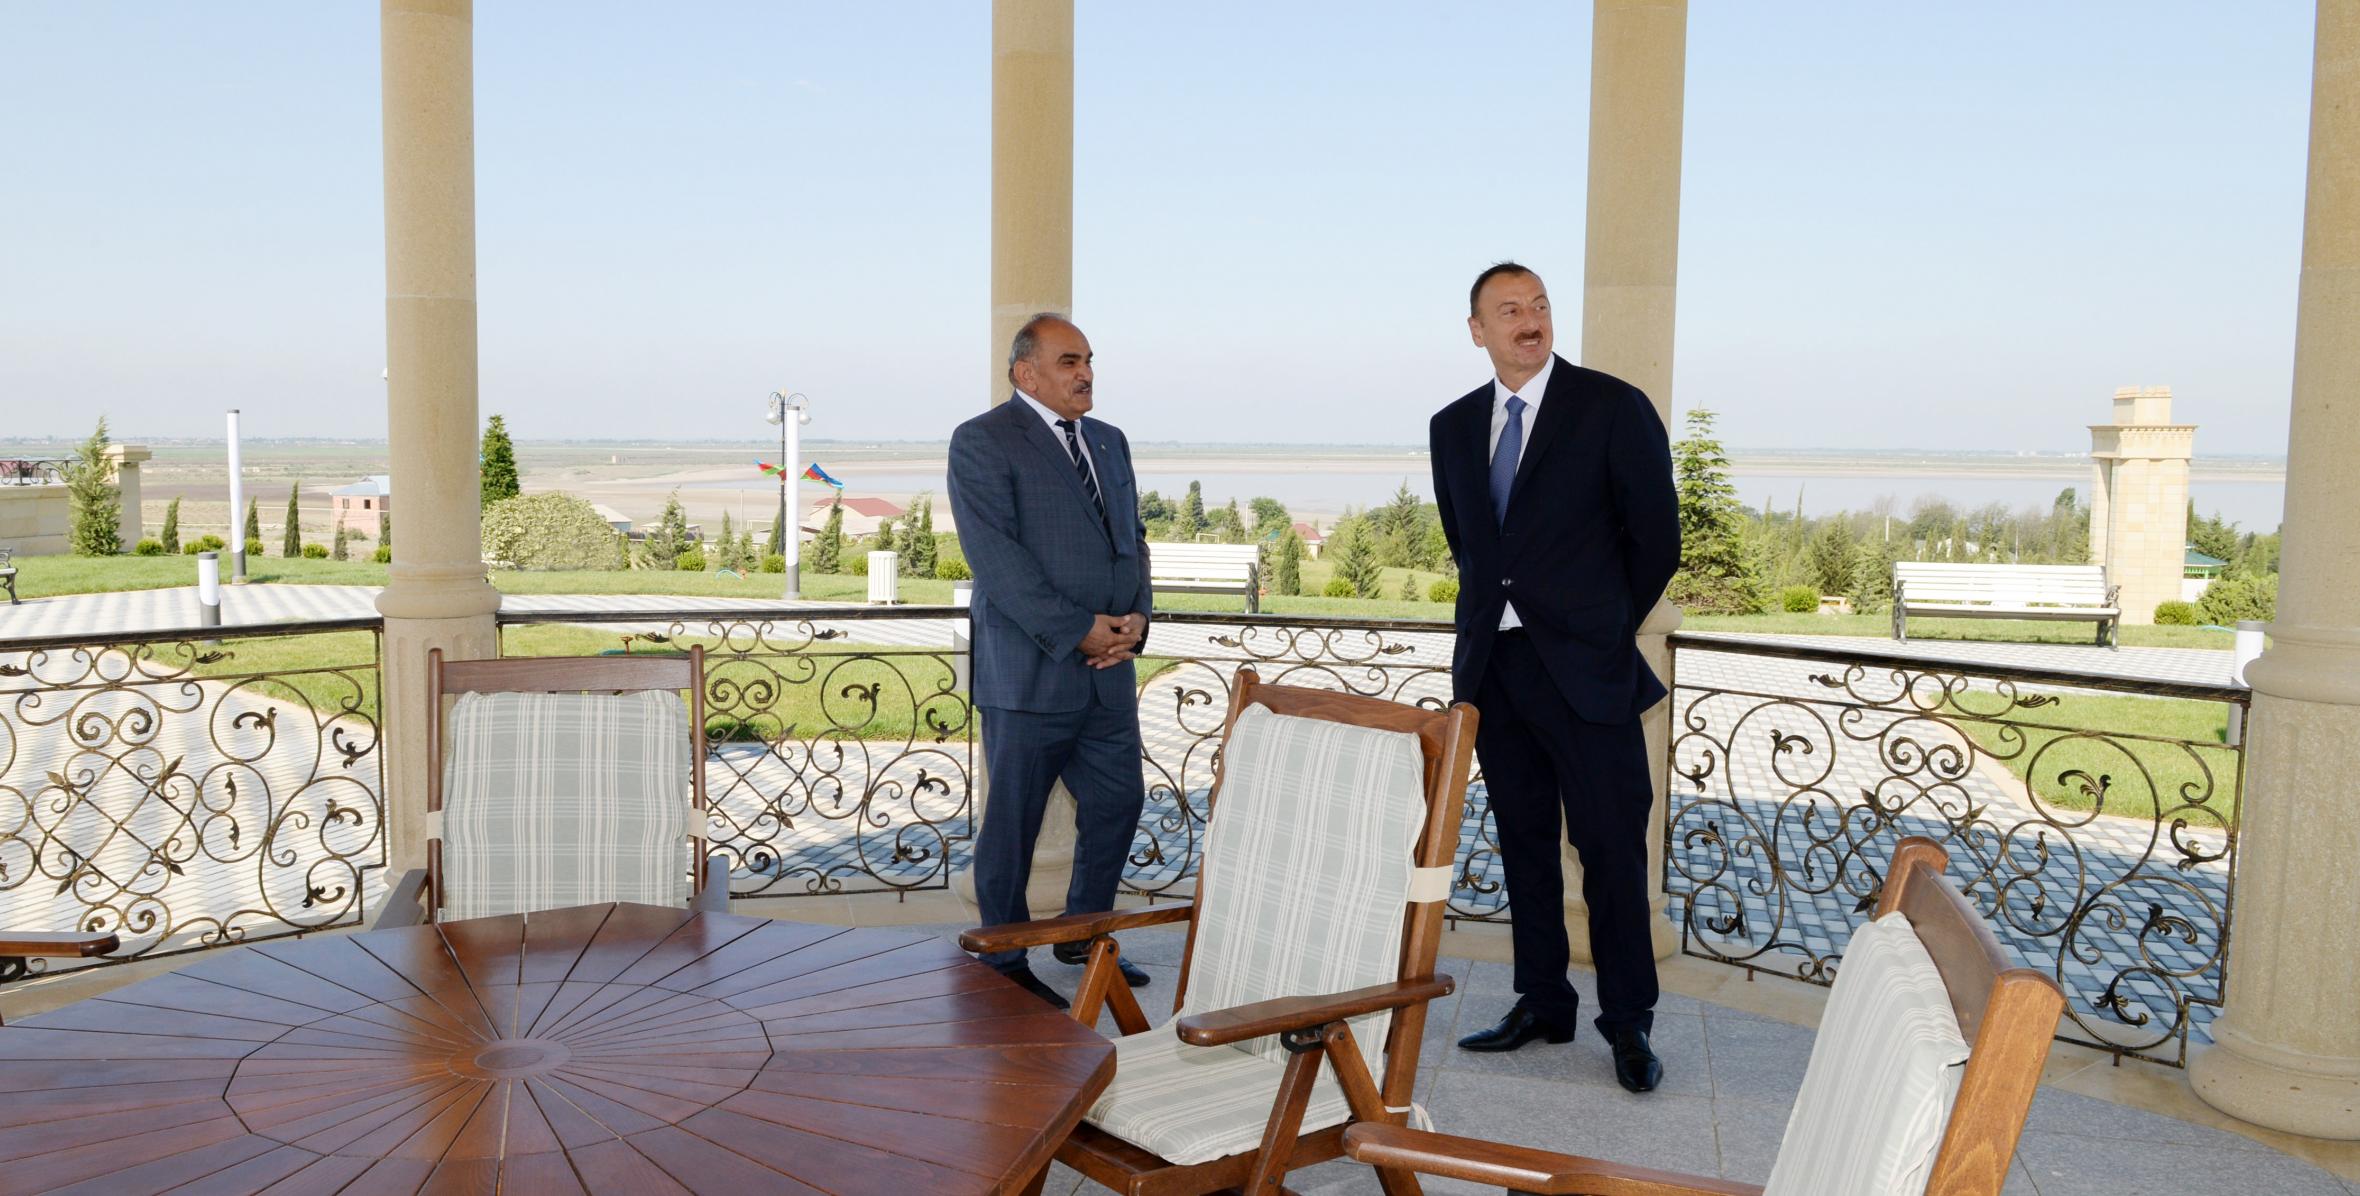 Ilham Aliyev reviewed the Flag Square in Shirvan